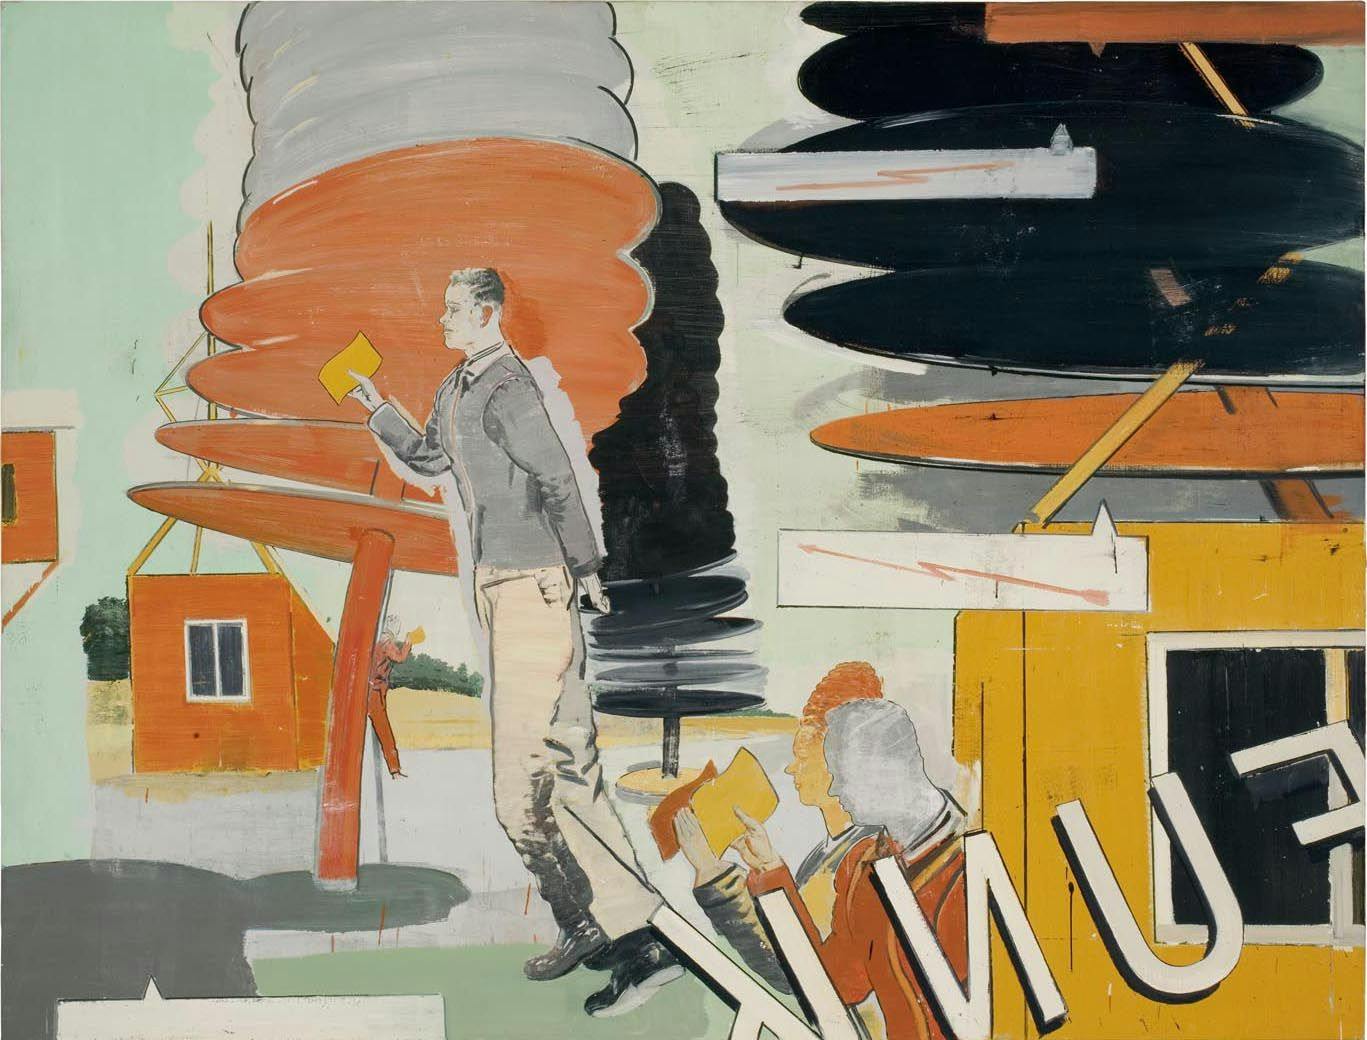 A painting by Neo Rauch, titled Funk, dated 1997.